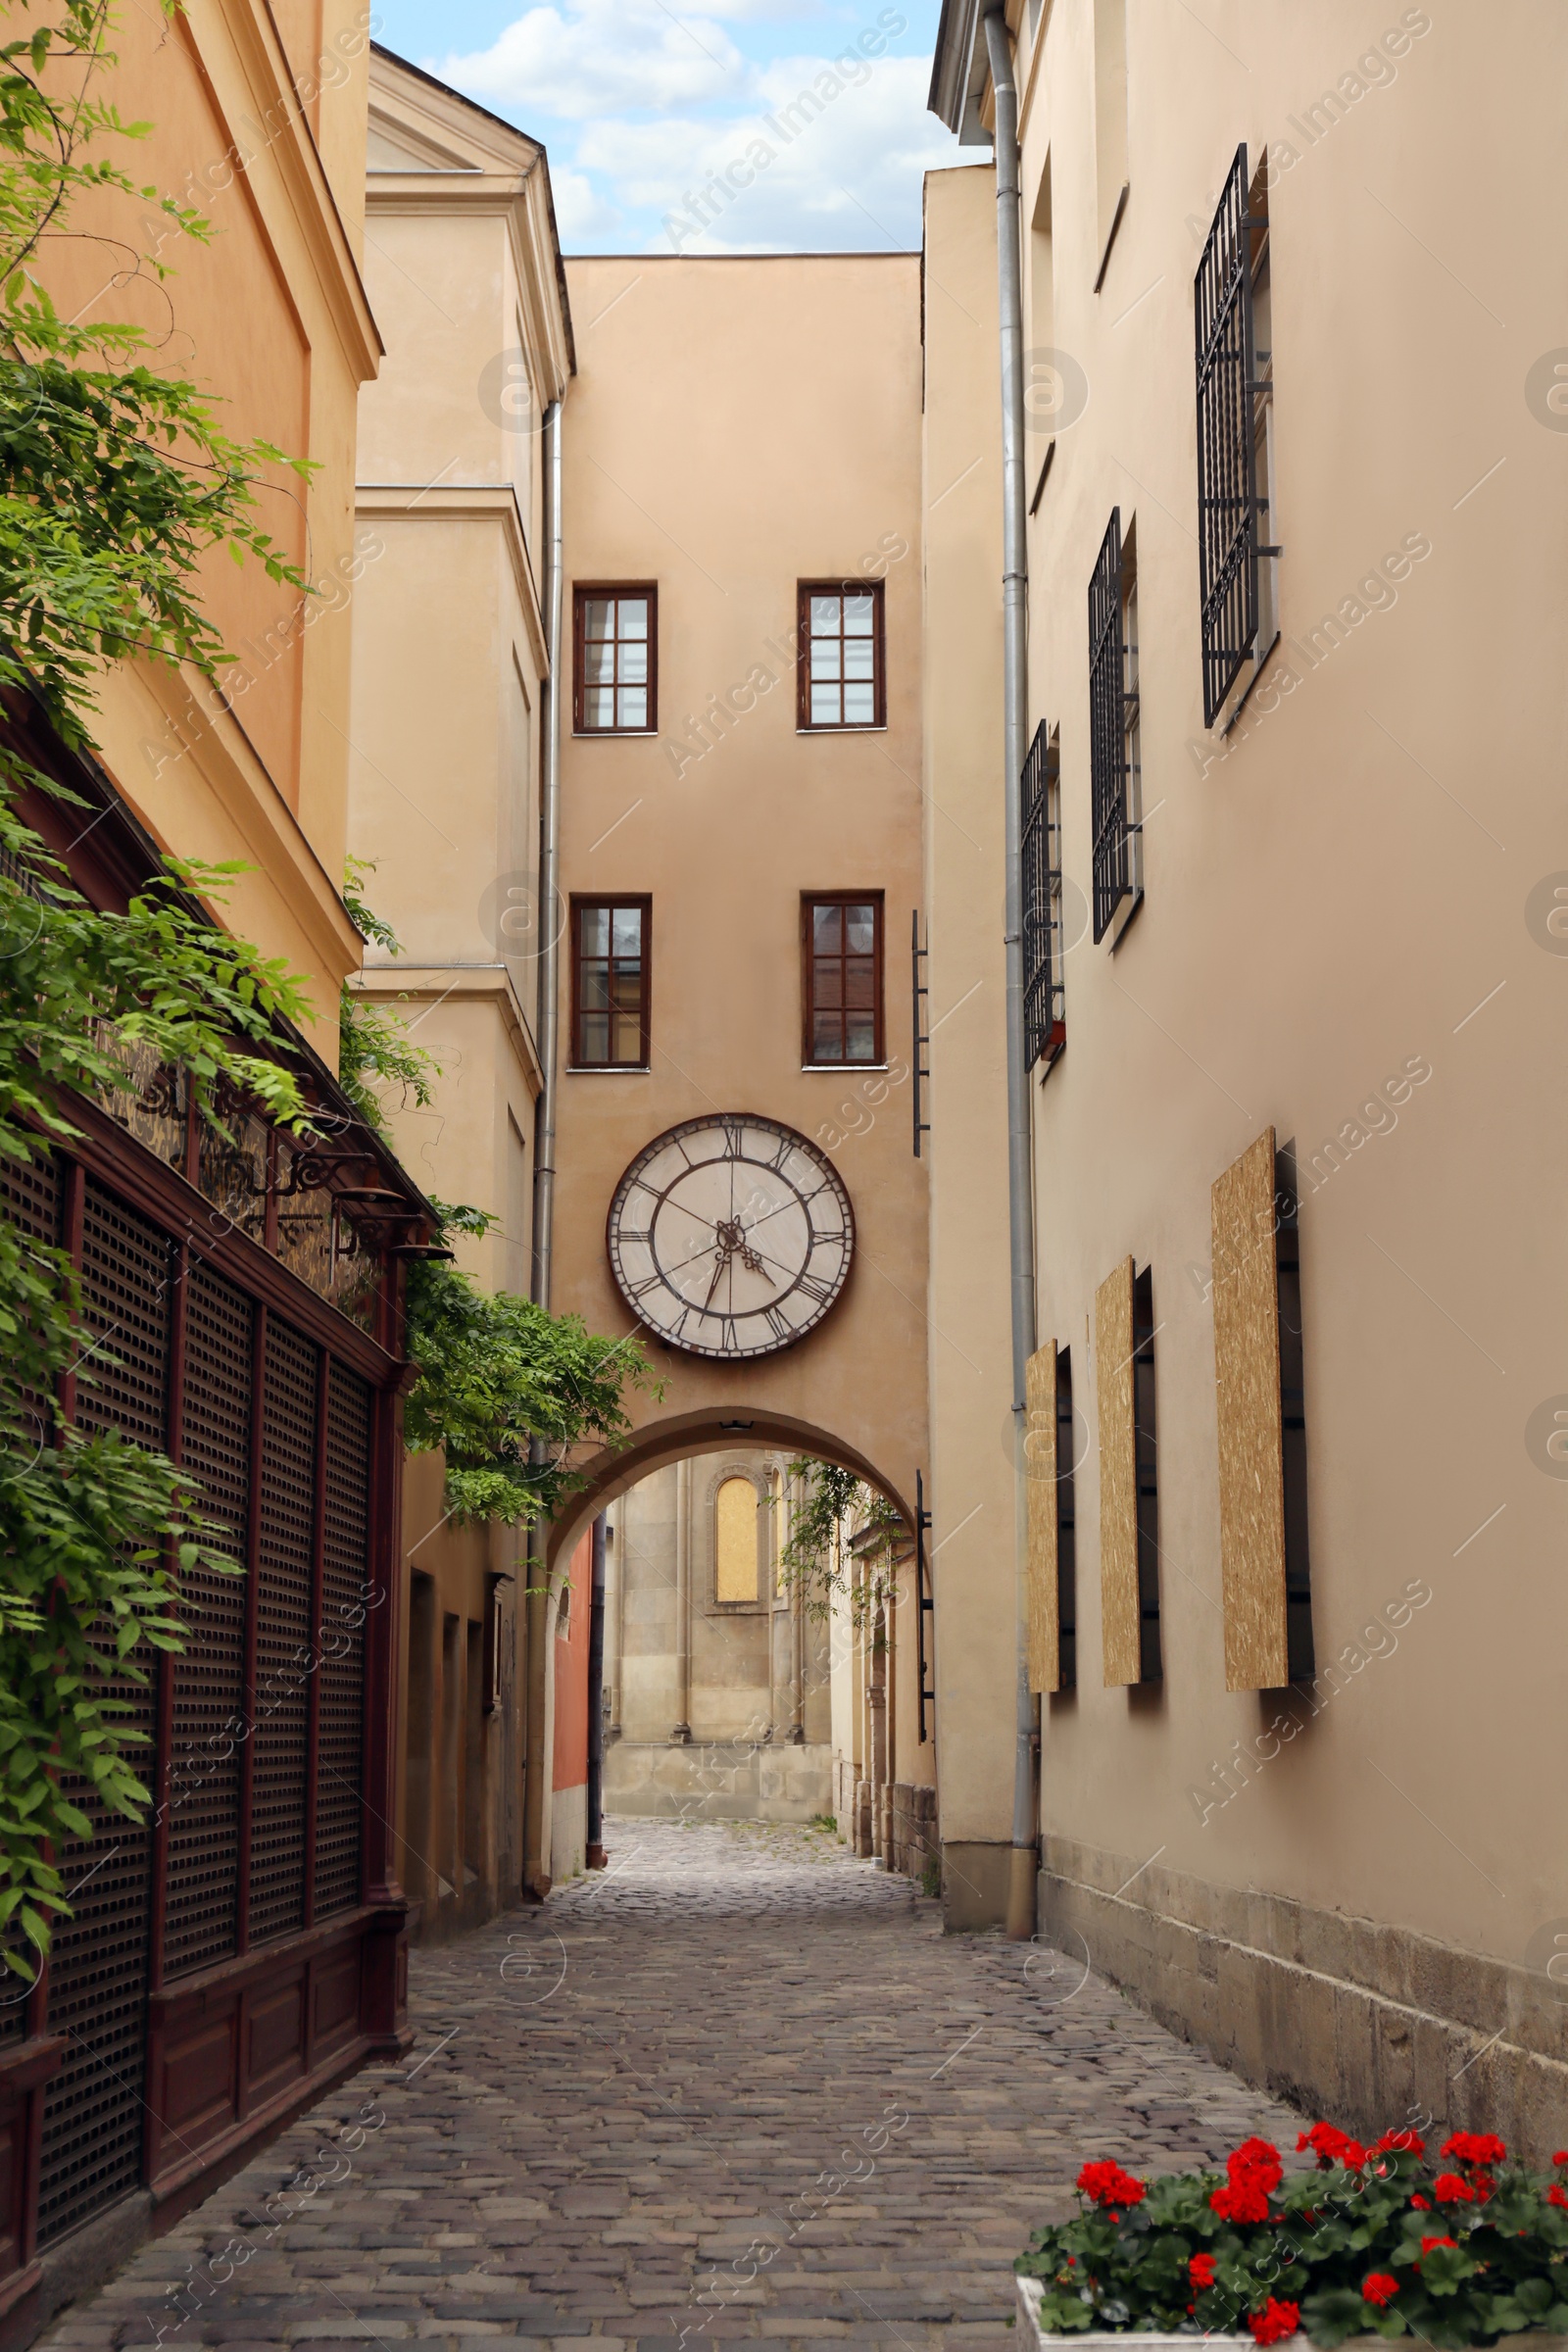 Photo of Narrow city street with beautiful buildings and clock